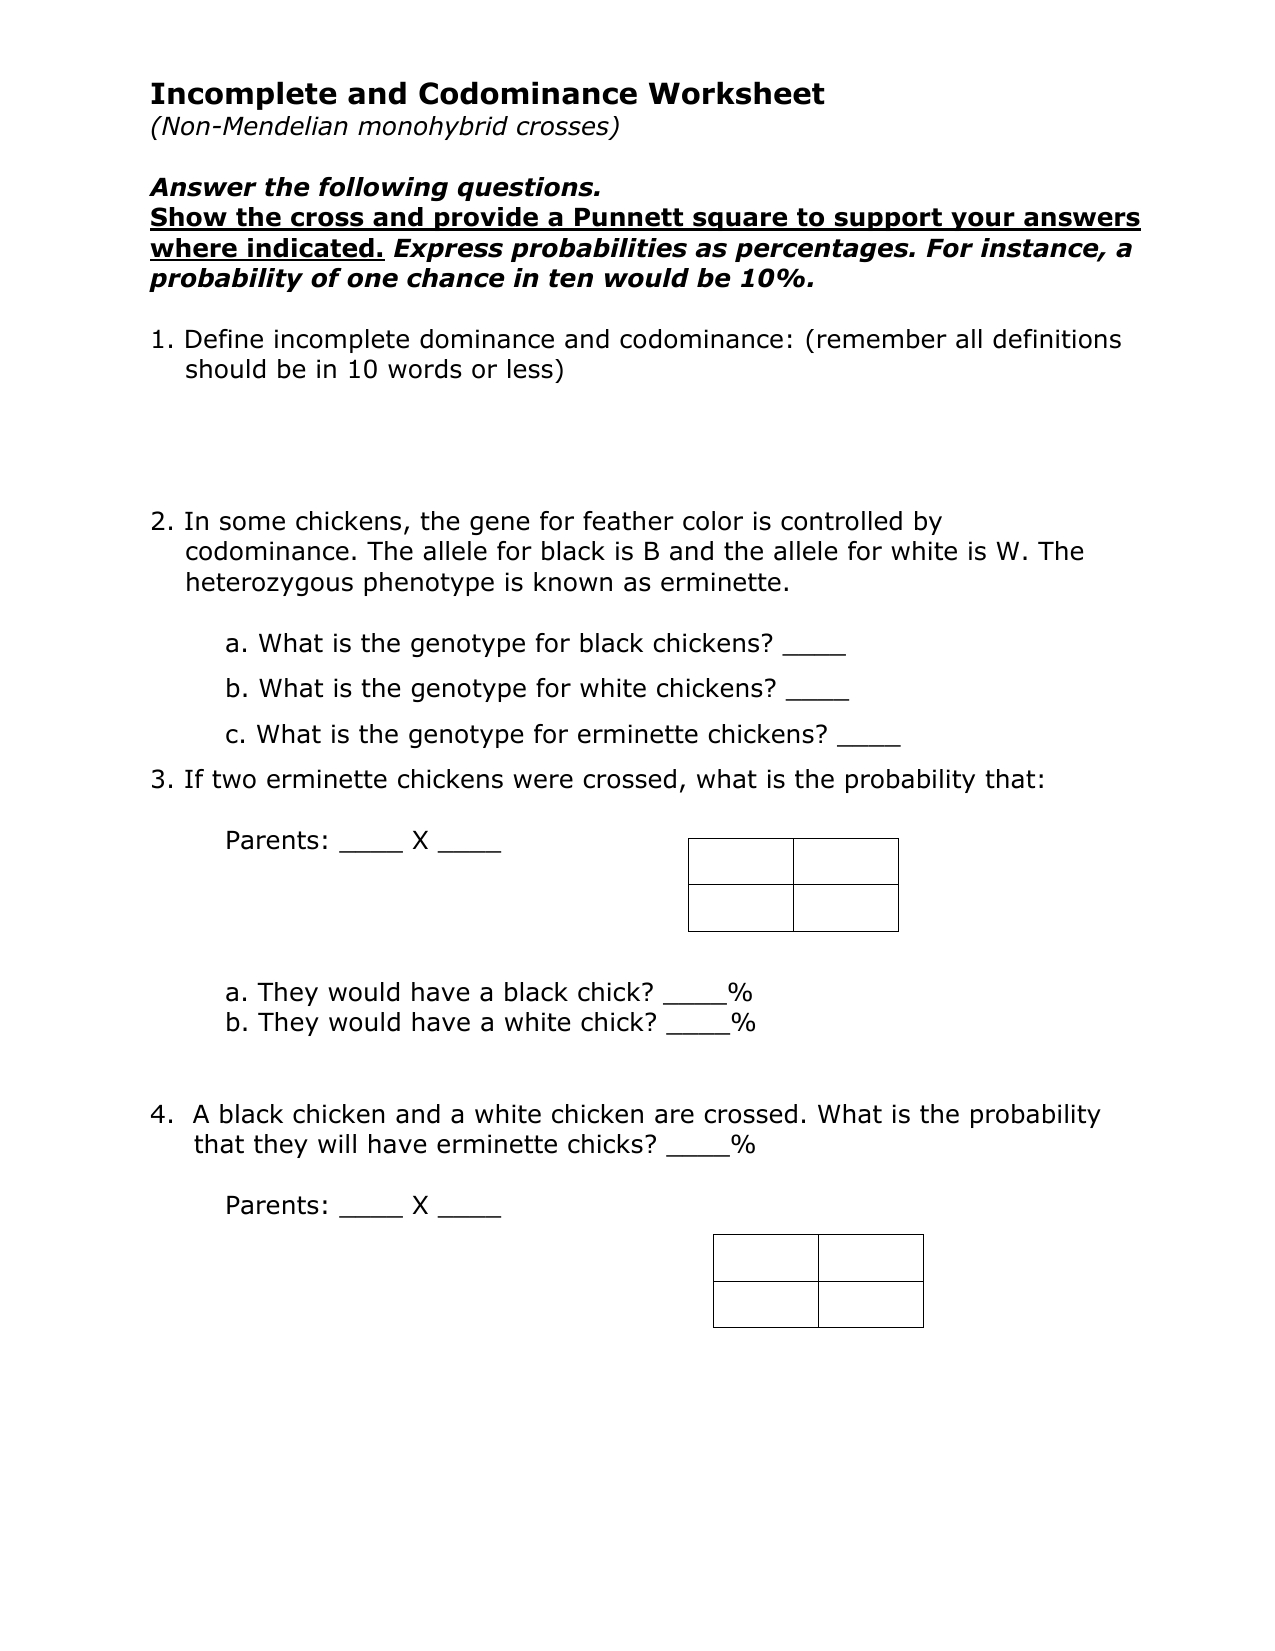 Incomplete And Codominance Worksheet As Well As Incomplete Dominance And Codominance Worksheet Answer Key